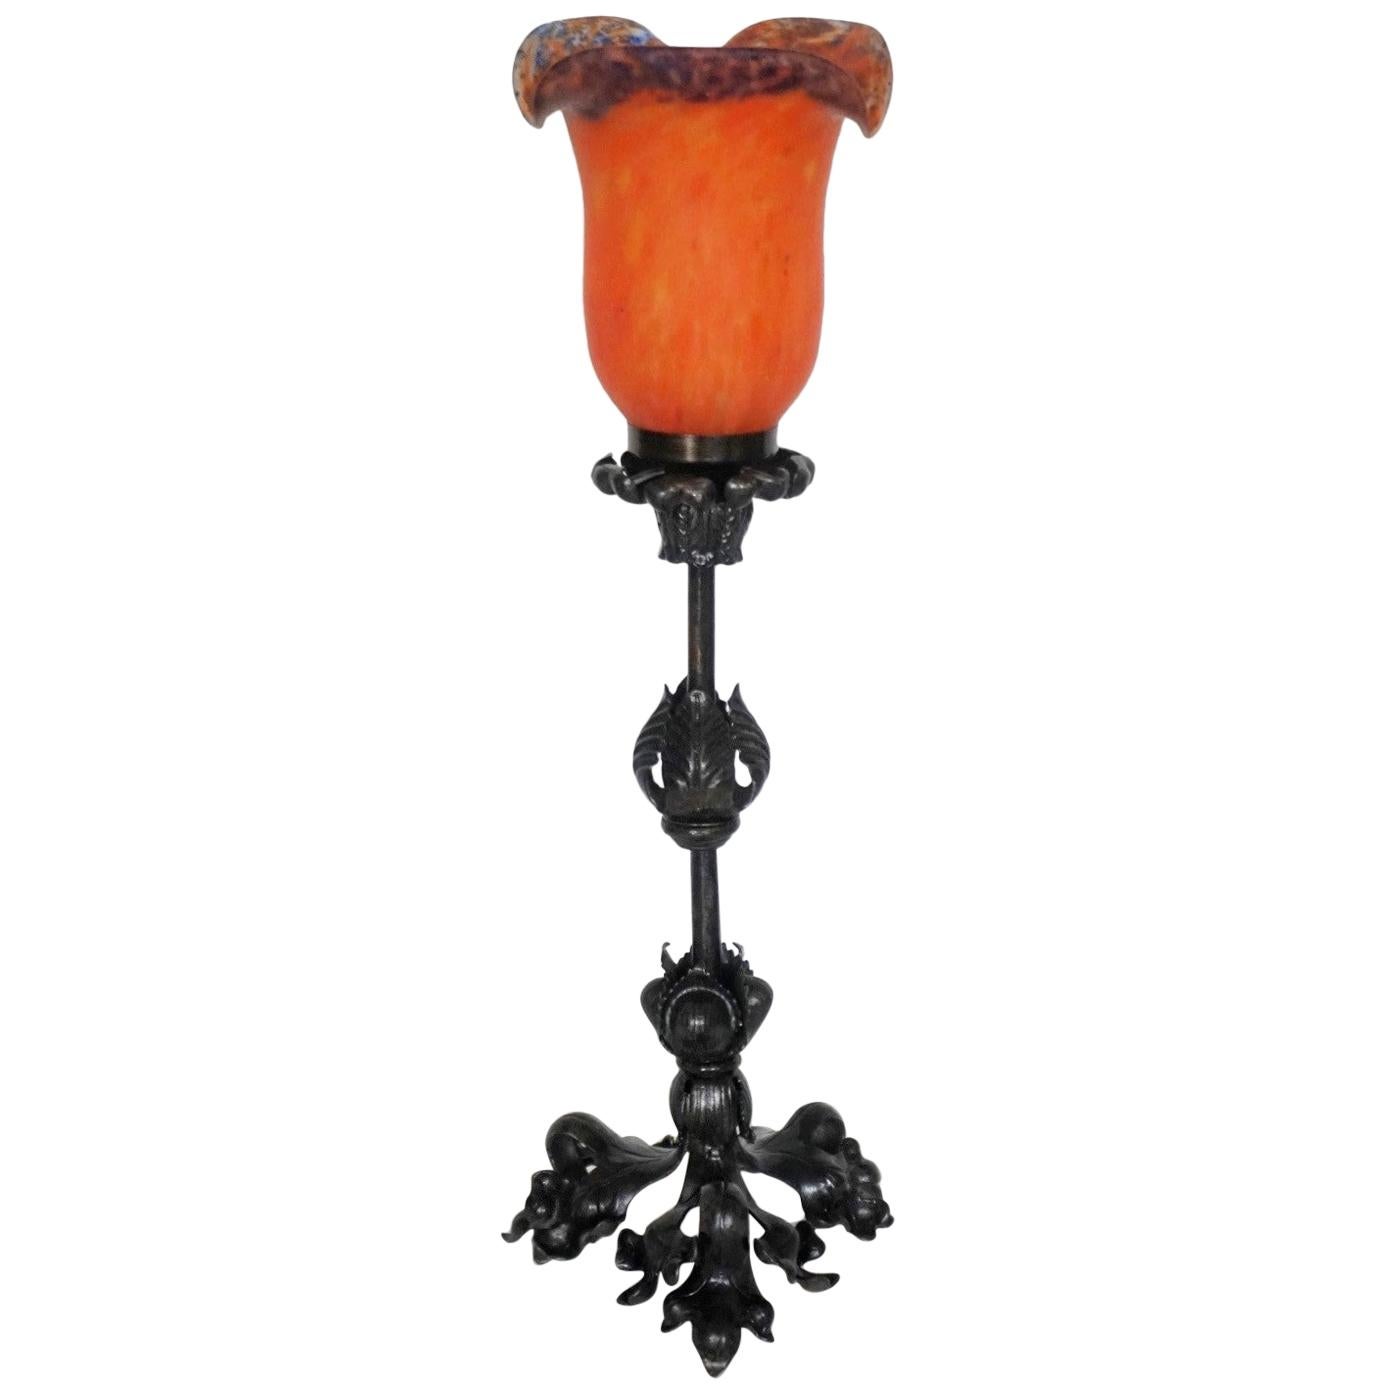 French Art Deco Wrought Iron Table Lamp with Pâte de Verre Glass Shade, 1920s